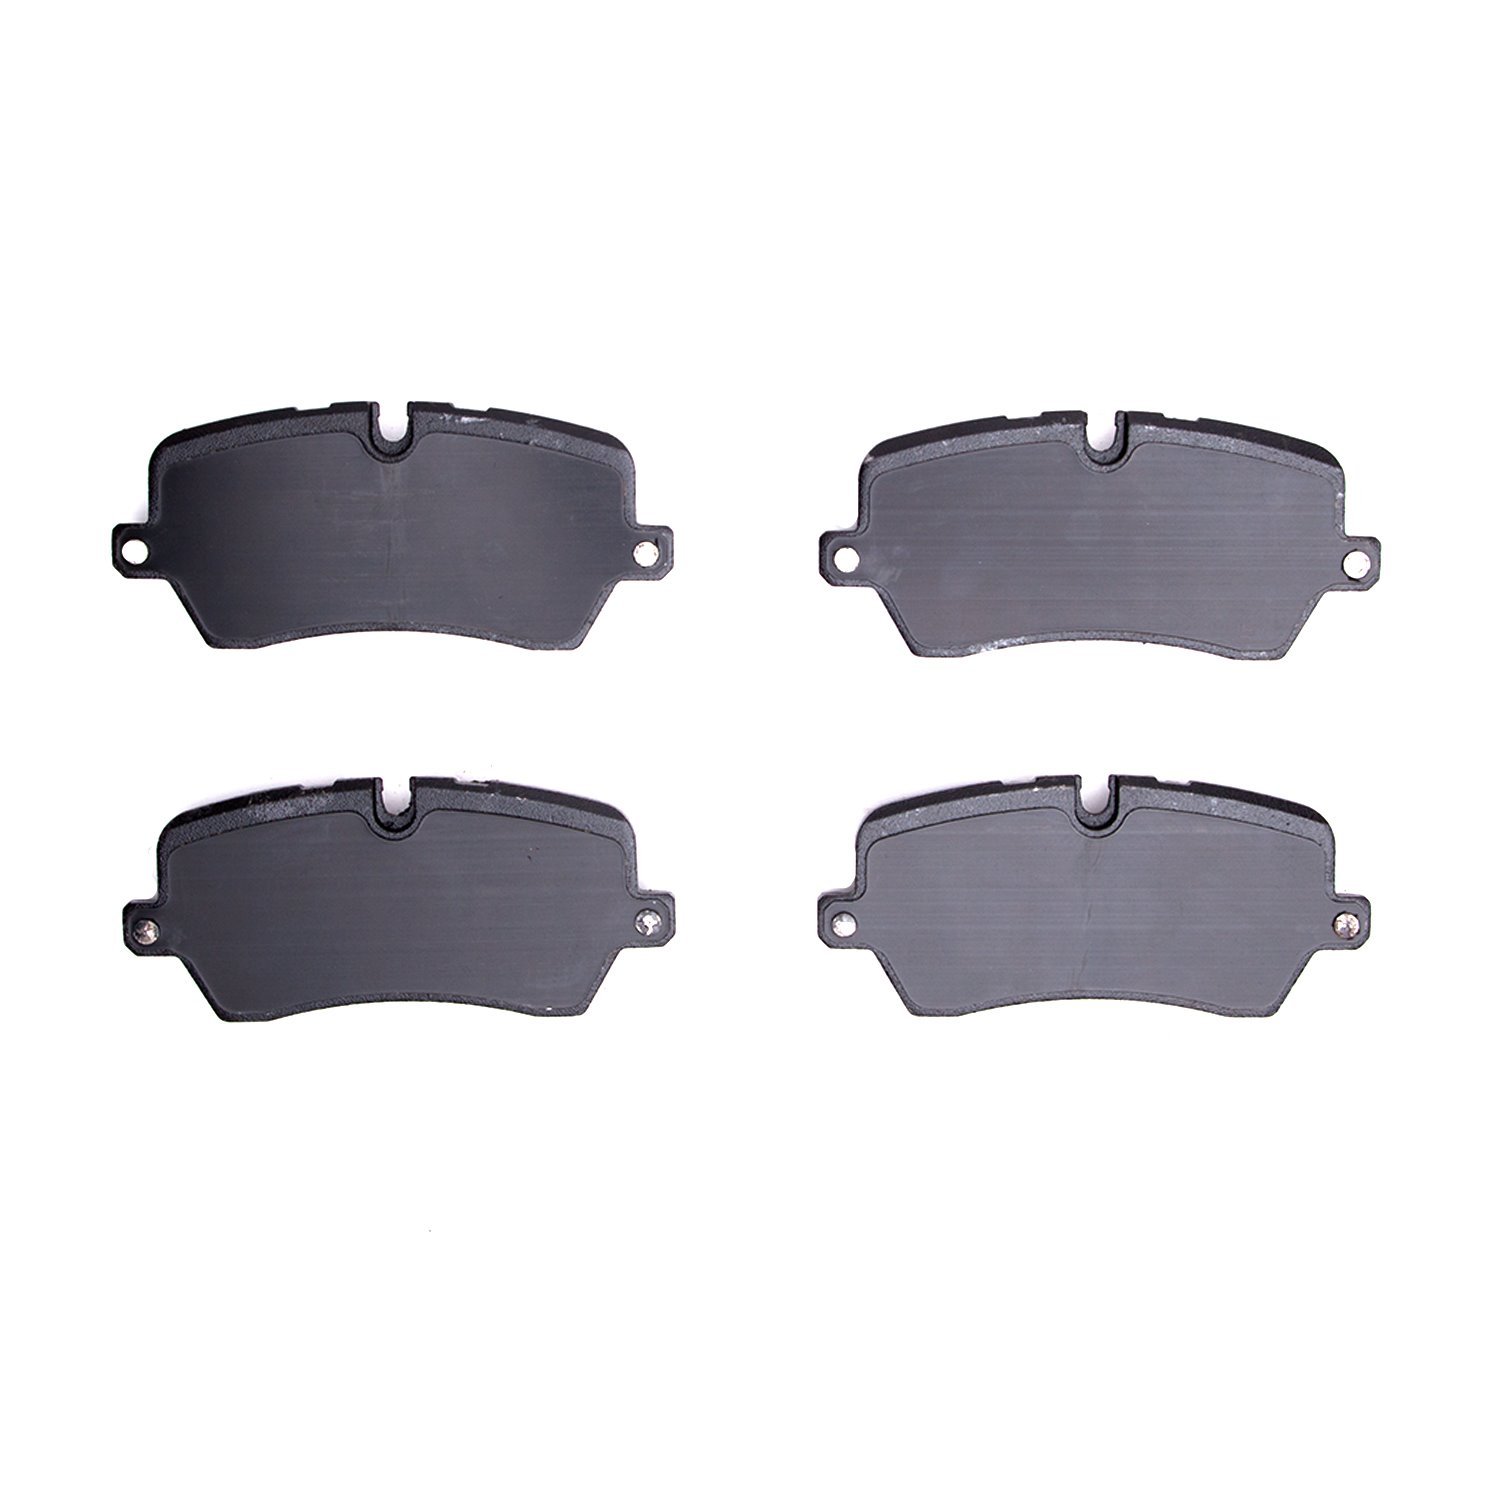 1552-1692-00 5000 Advanced Ceramic Brake Pads, Fits Select Land Rover, Position: Rear